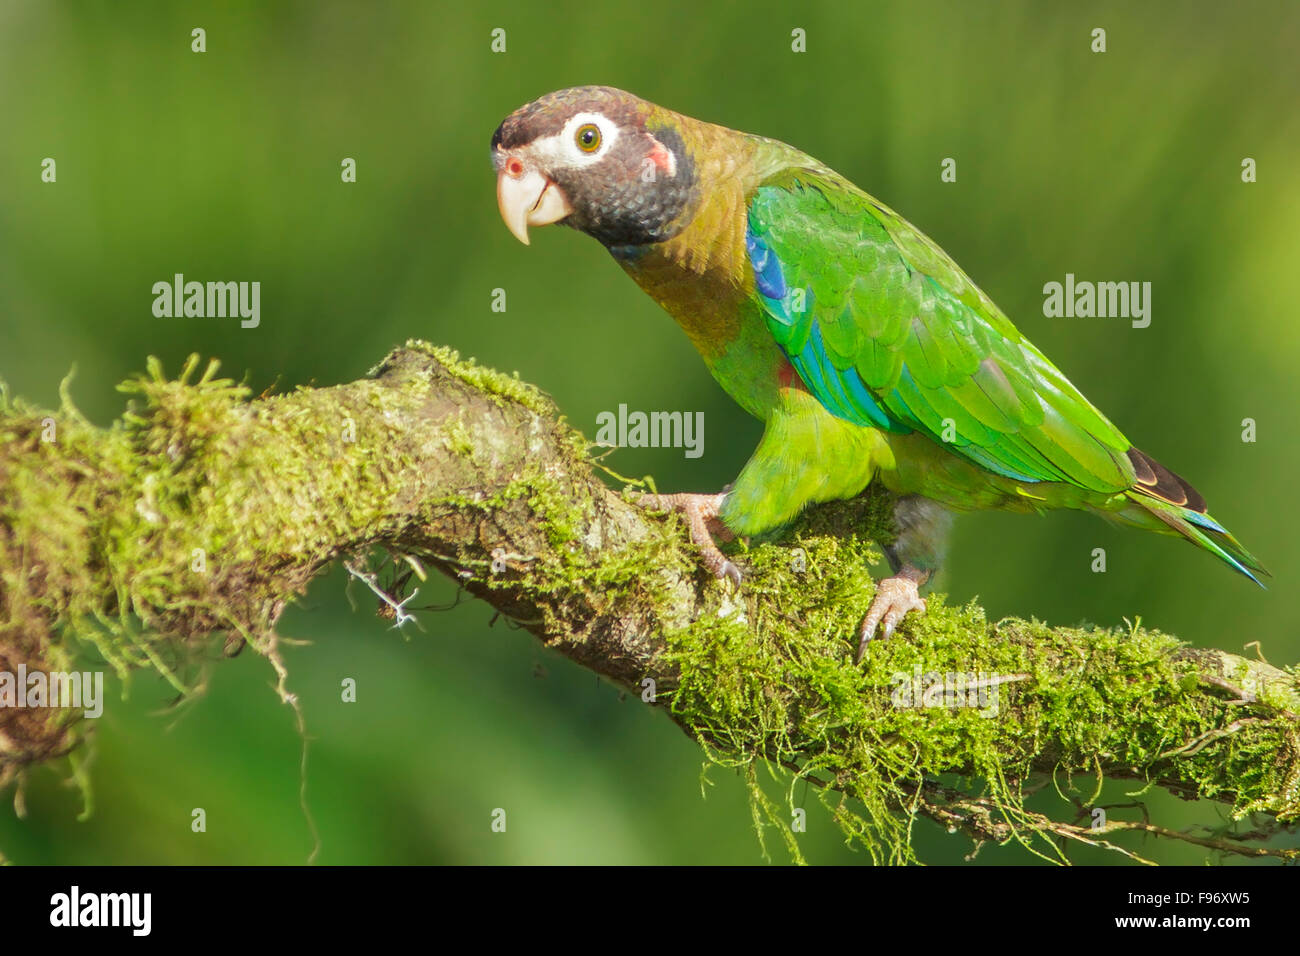 Brownhooded Parrot (Pyrilia haematotis) perched on a branch in Costa Rica. Stock Photo